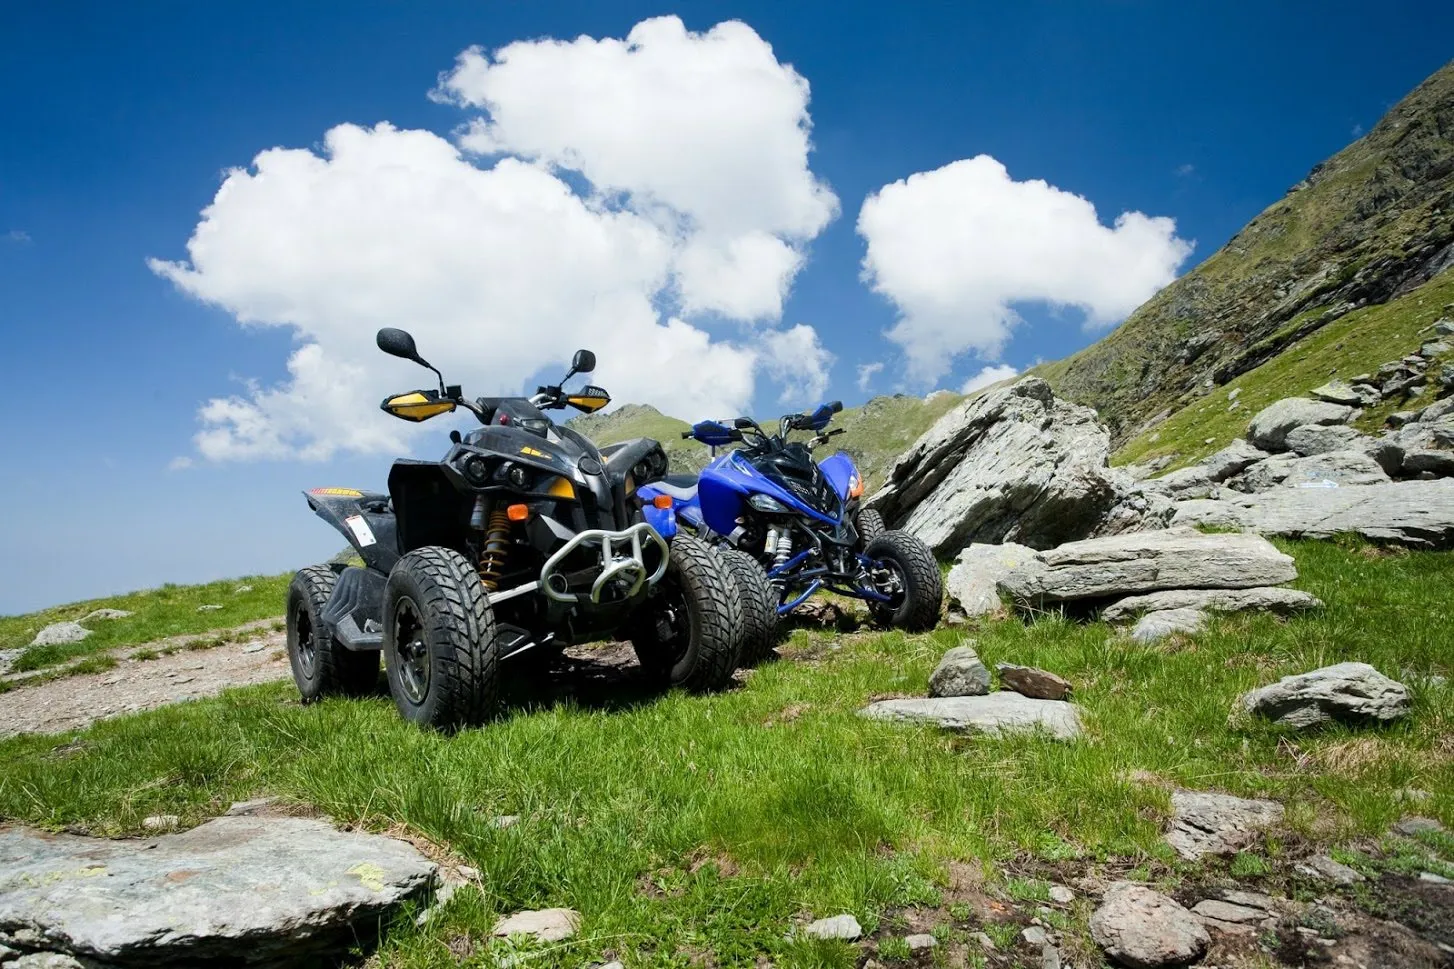 ATV Insurance: What It Does and Doesn’t Cover